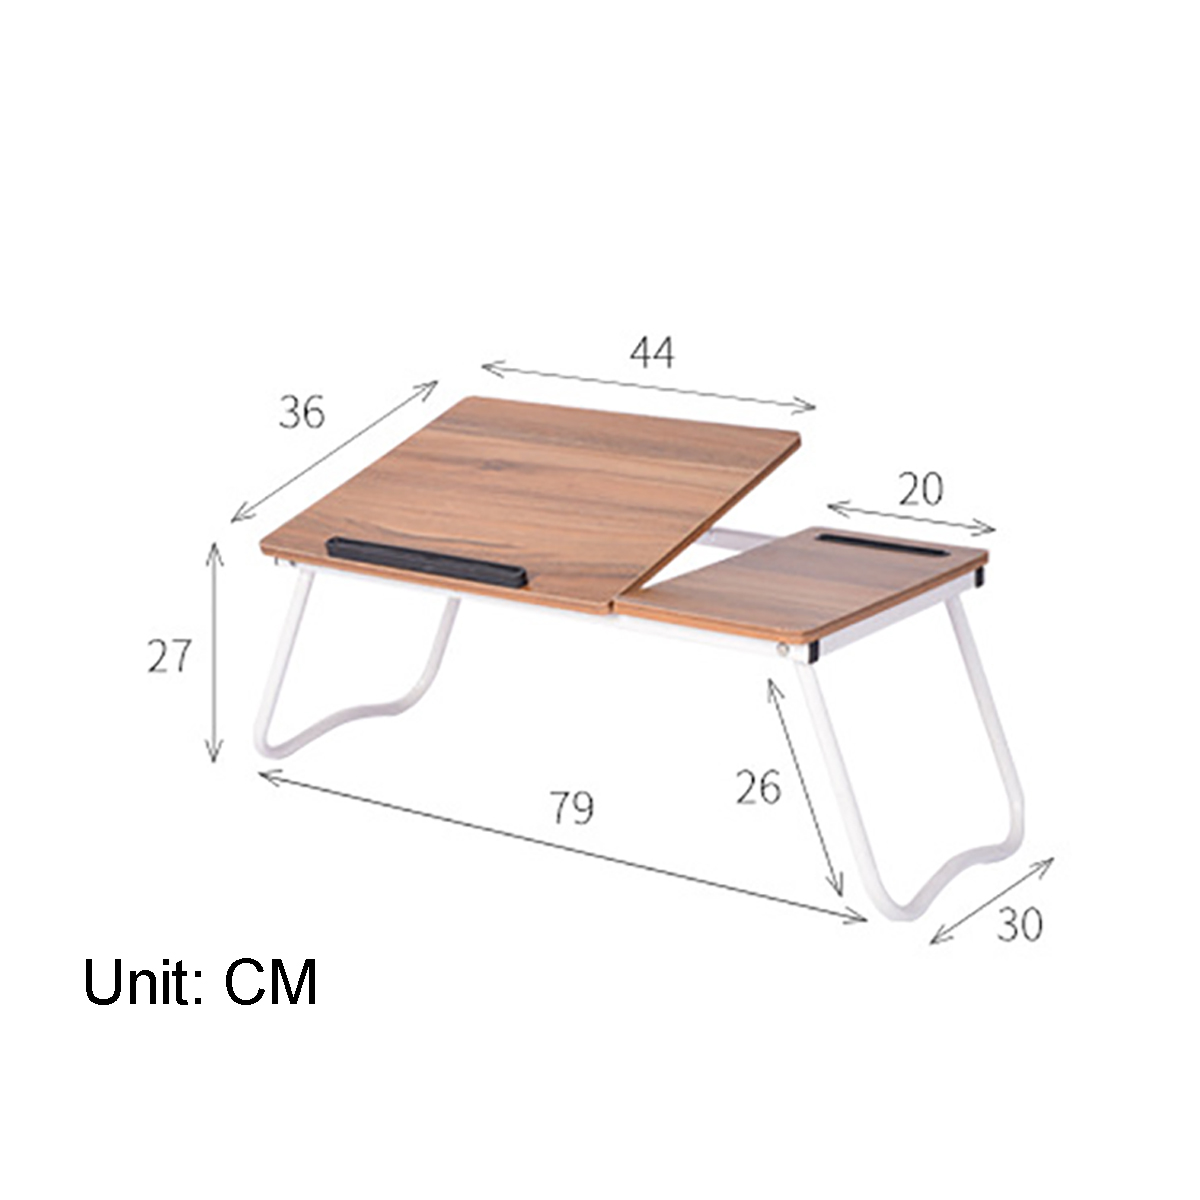 Foldable-Bed-Tray-26-inches-Laptop-Desk-Adjustable-Bed-Table-with-Storage-Slots-Tablet-Phone-Holder--1630418-6